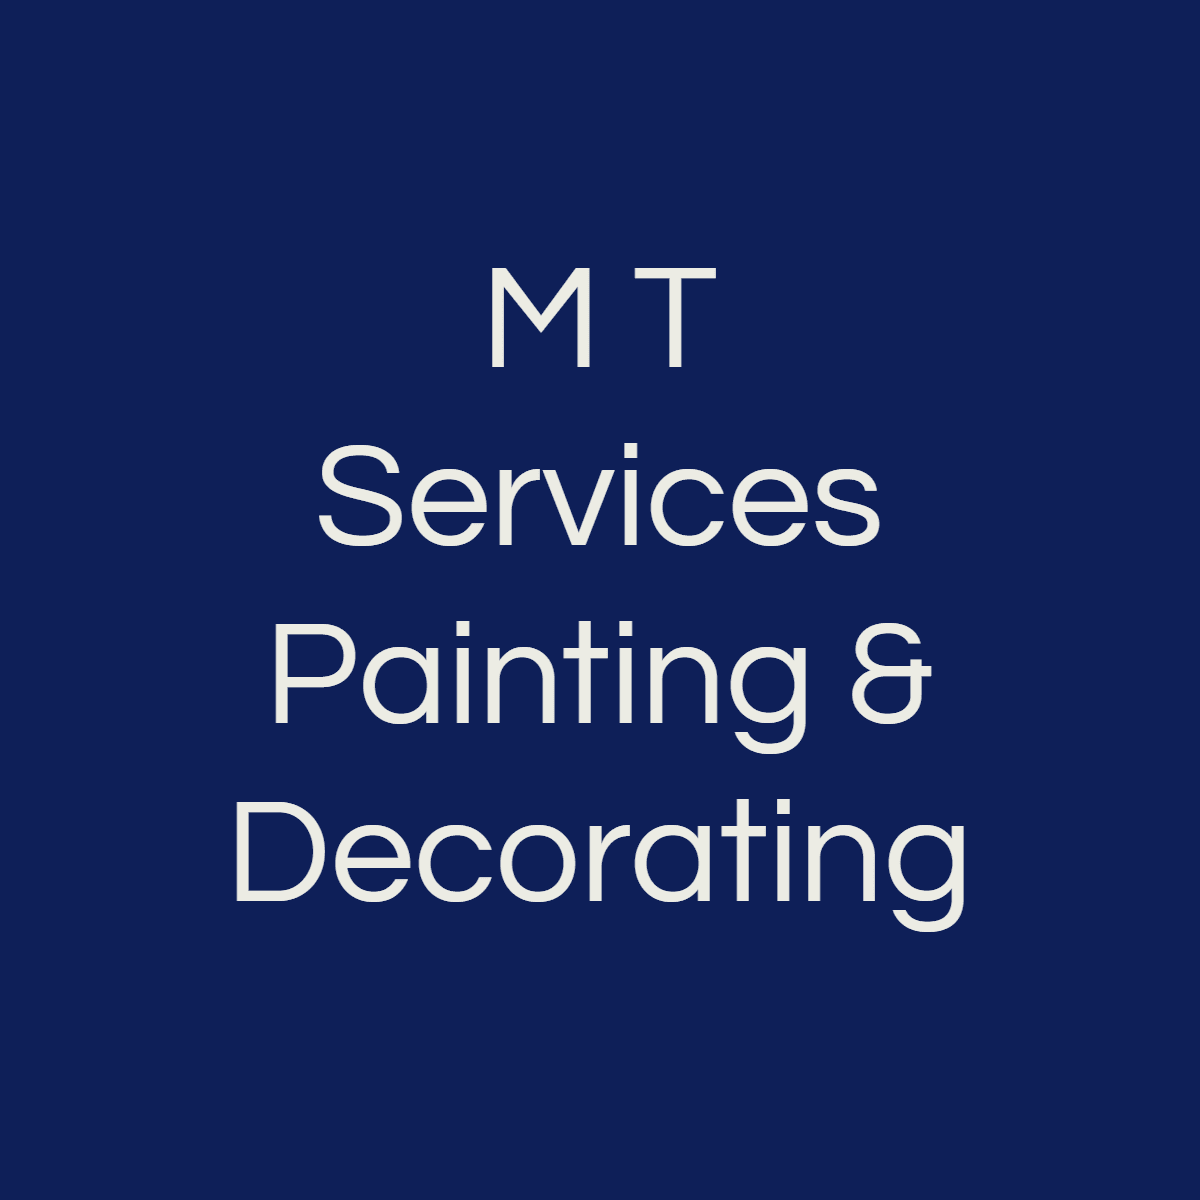 M T Services Painting & Decorating Logo